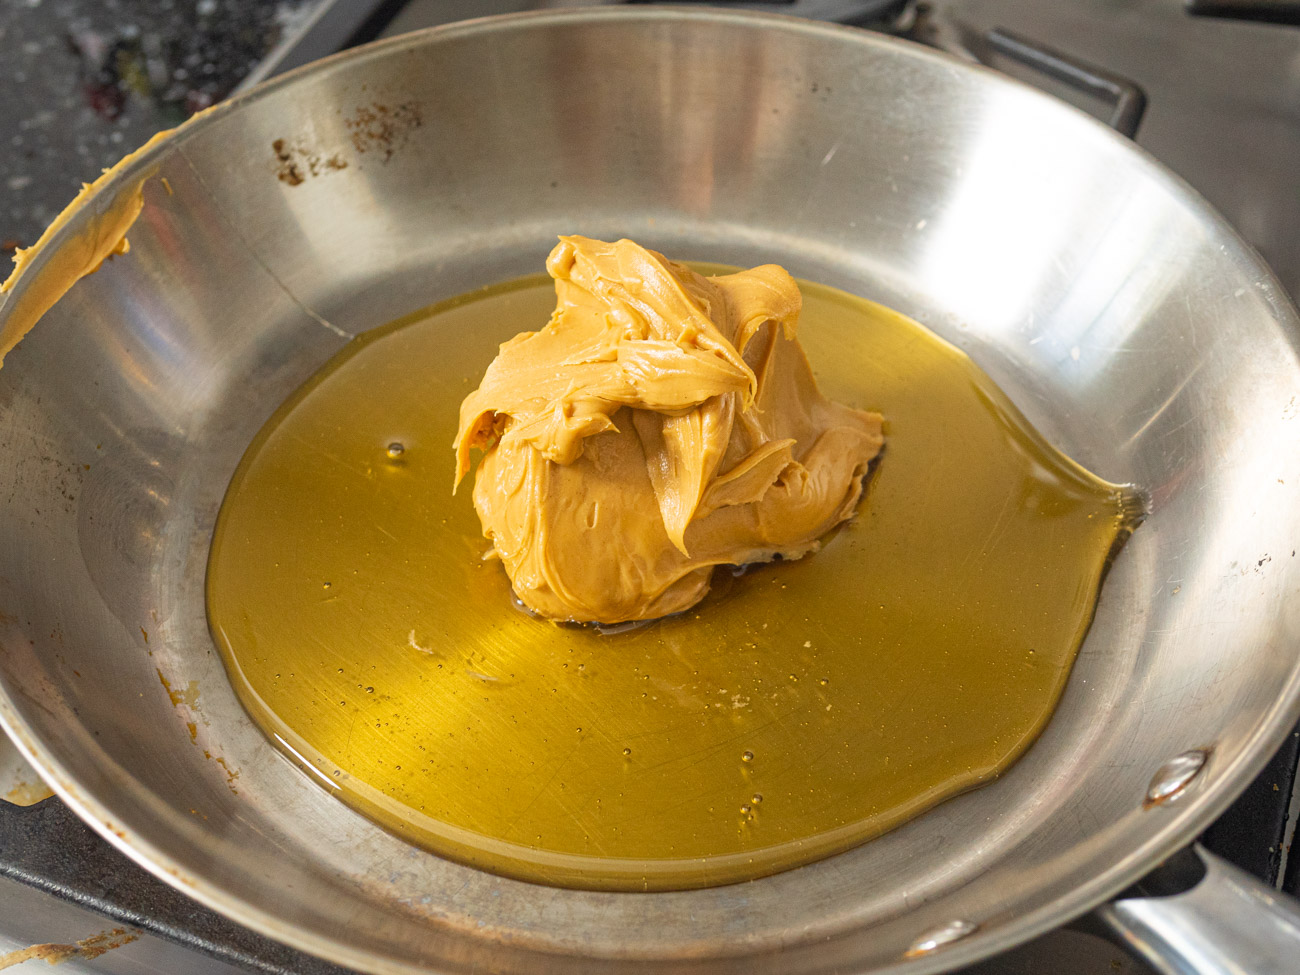 In a medium saucepan, combine the peanut butter and honey over medium heat until melted.